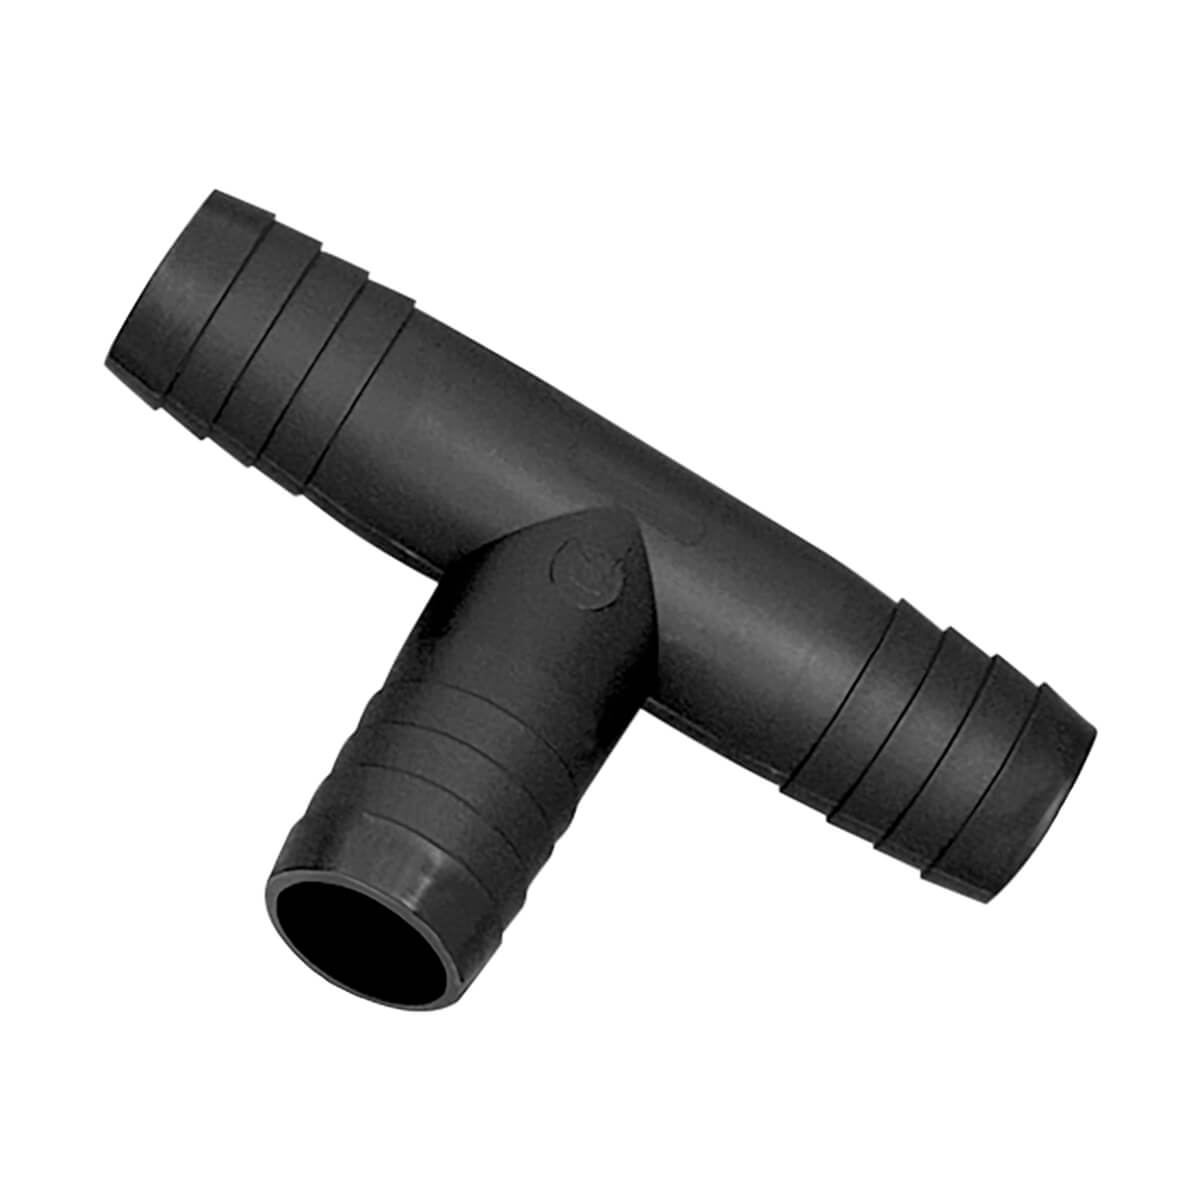 Insert Tee 1/2-in Hose Barb